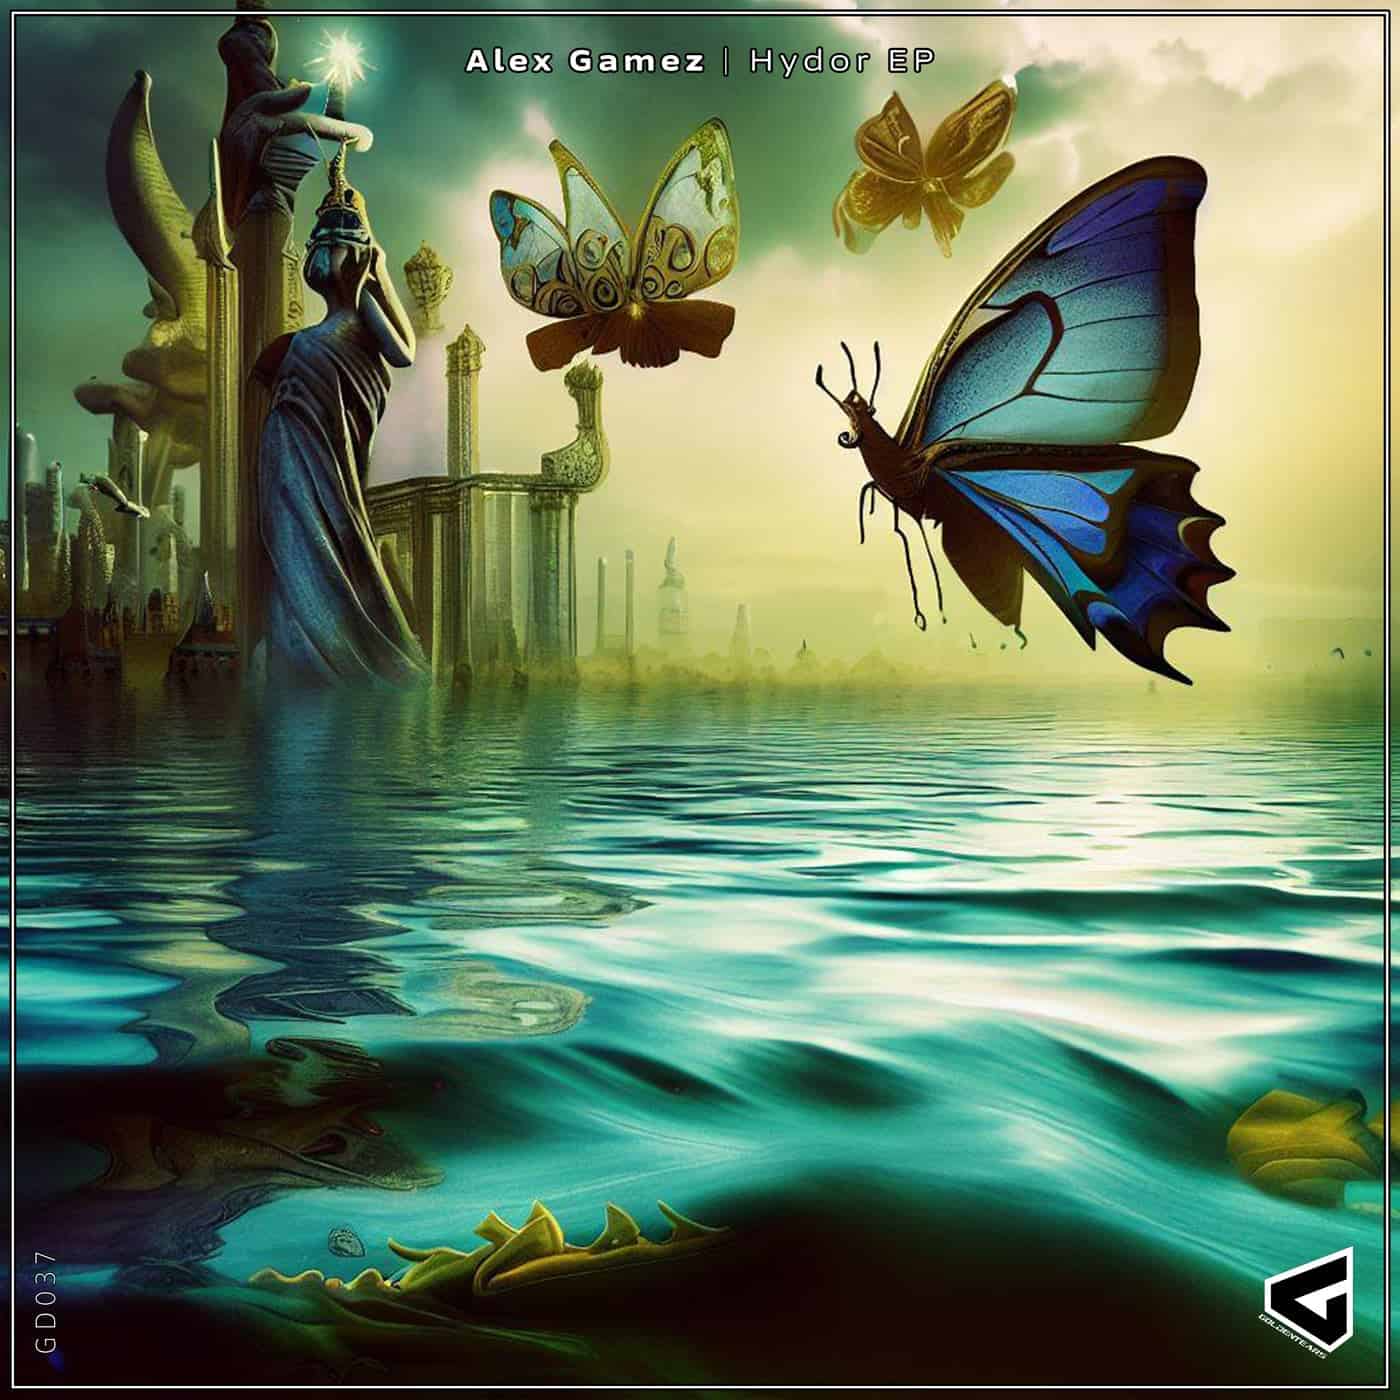 image cover: Hydor EP by Alex Gamez on GoldenTears